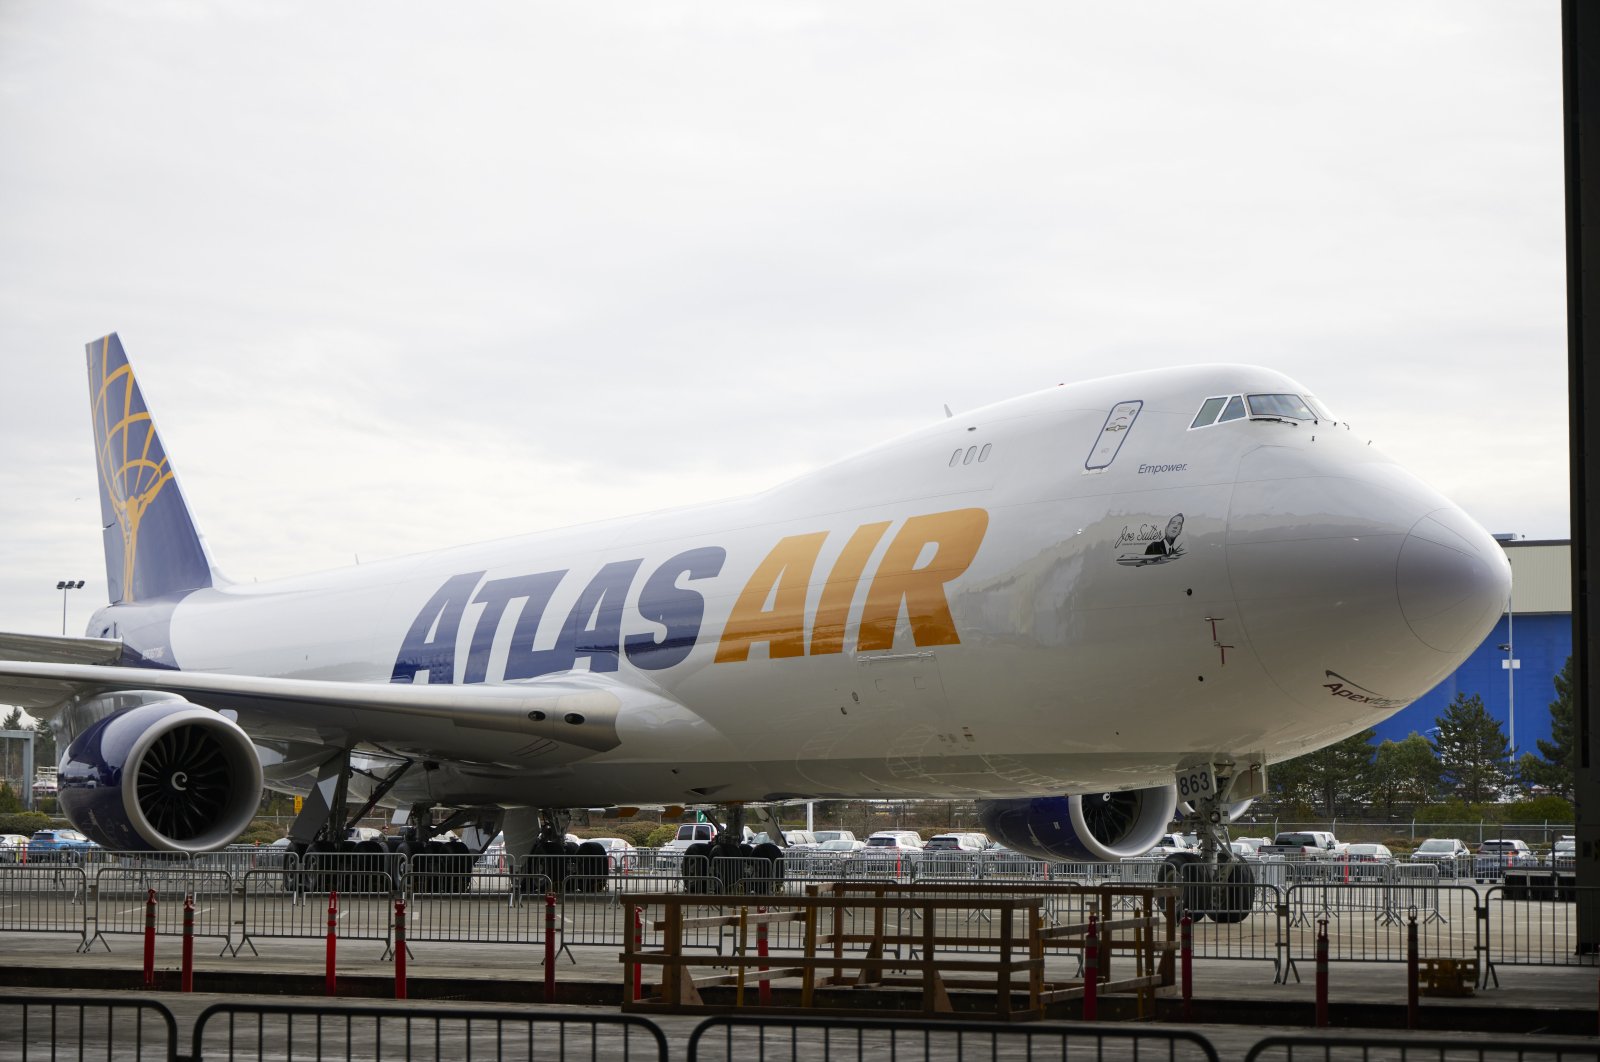 The final Boeing 747 is displayed at the assembly plant during a ceremony for the delivery of the jumbo jet to Atlas Air, in Everett, Washington, U.S., Jan. 31, 2023. (AP Photo)